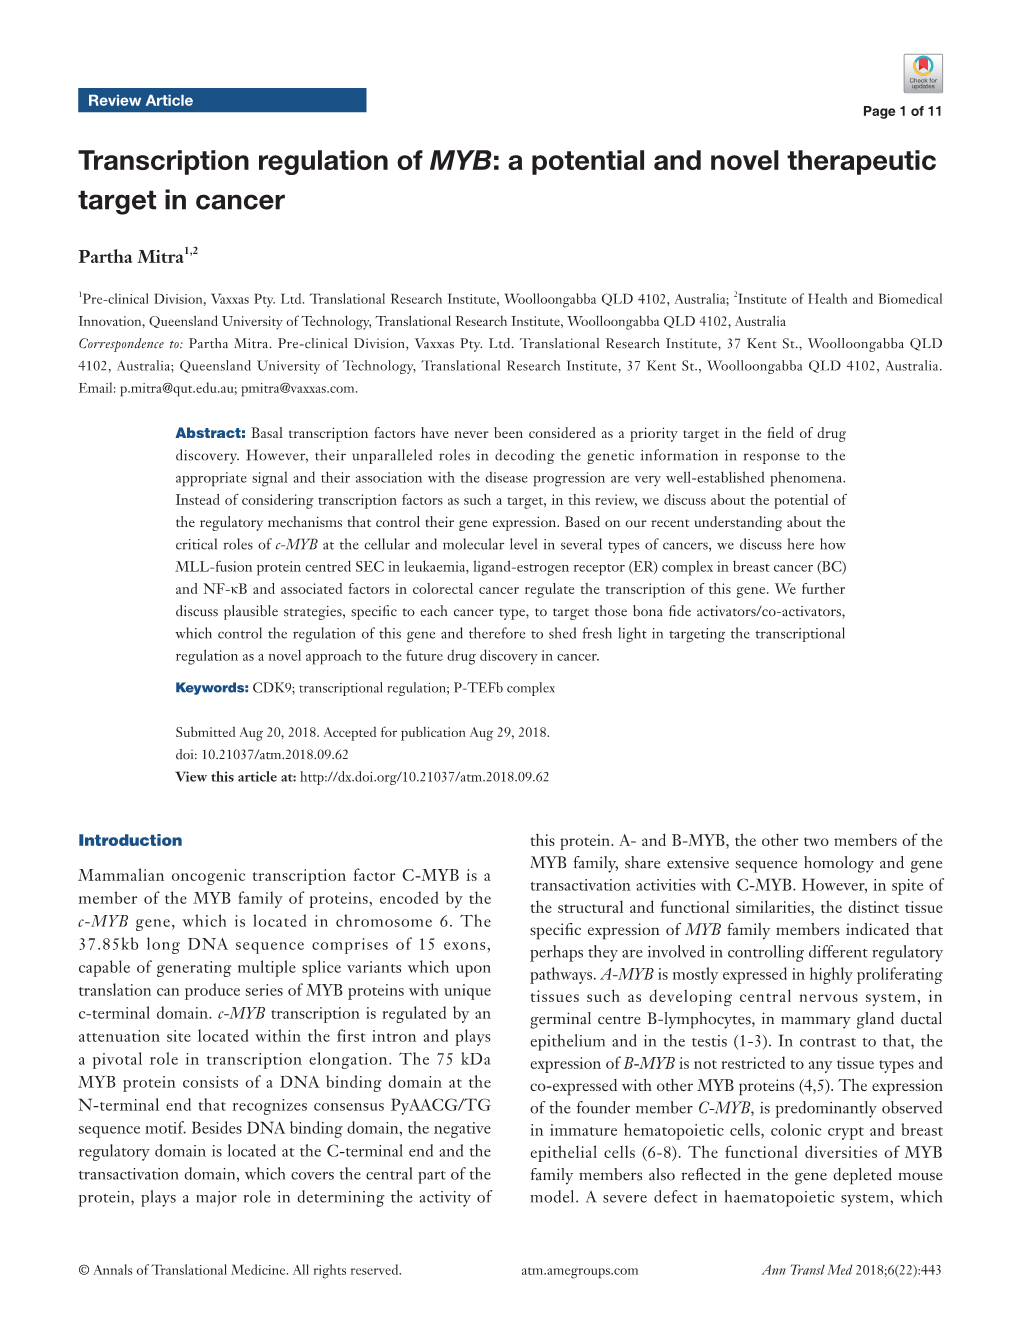 Transcription Regulation of MYB: a Potential and Novel Therapeutic Target in Cancer